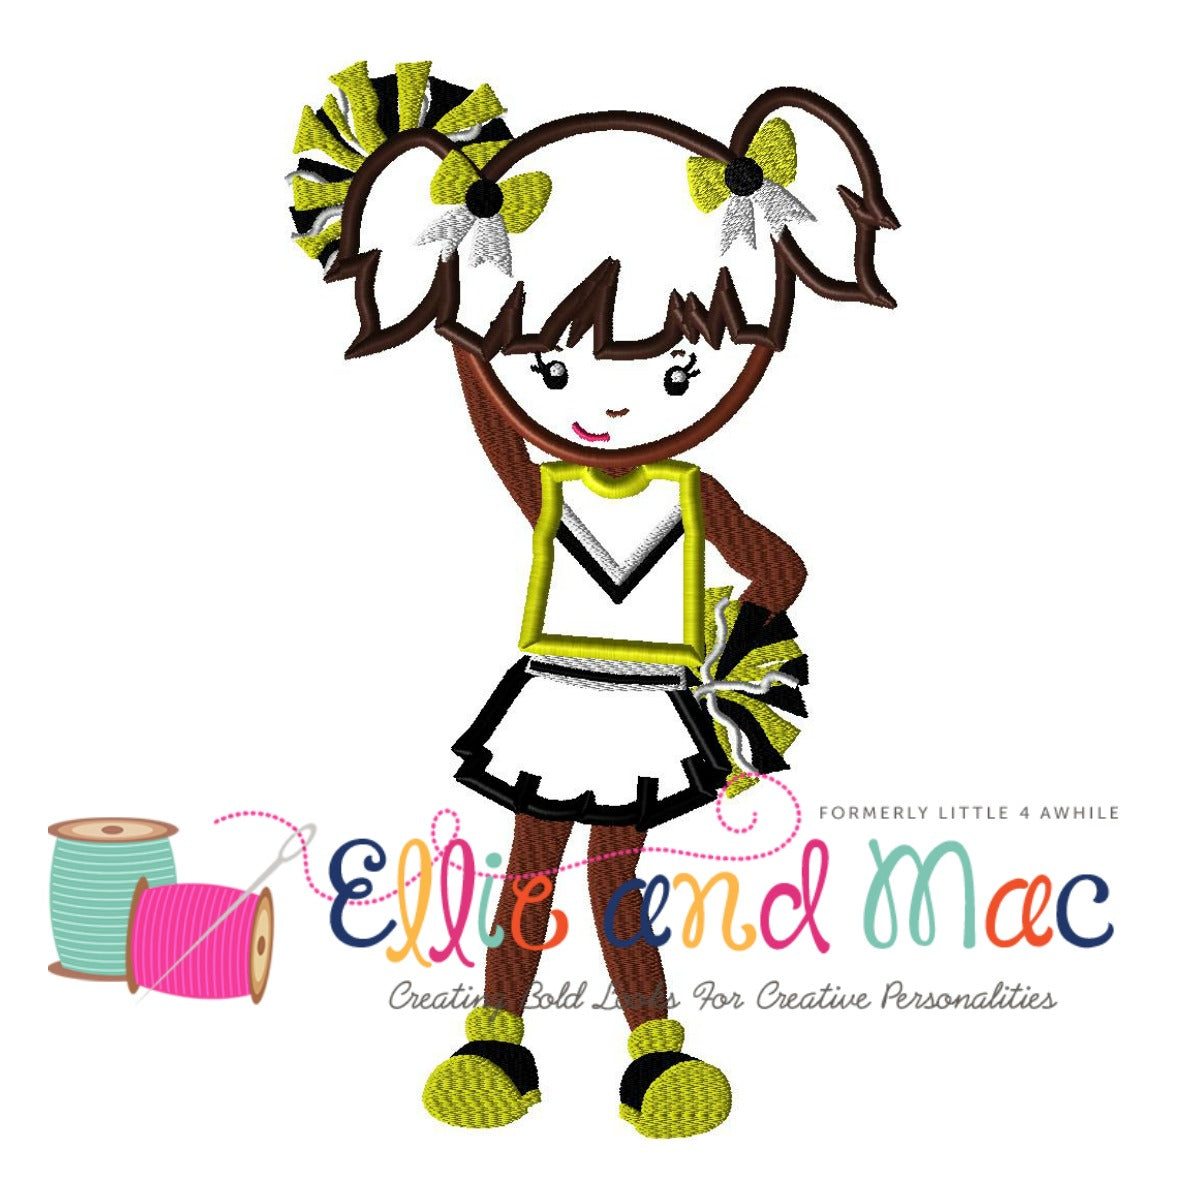 Cheer Girl Applique Embroidery Design - Ellie and Mac, Digital (PDF) Sewing Patterns | USA, Canada, UK, Australia